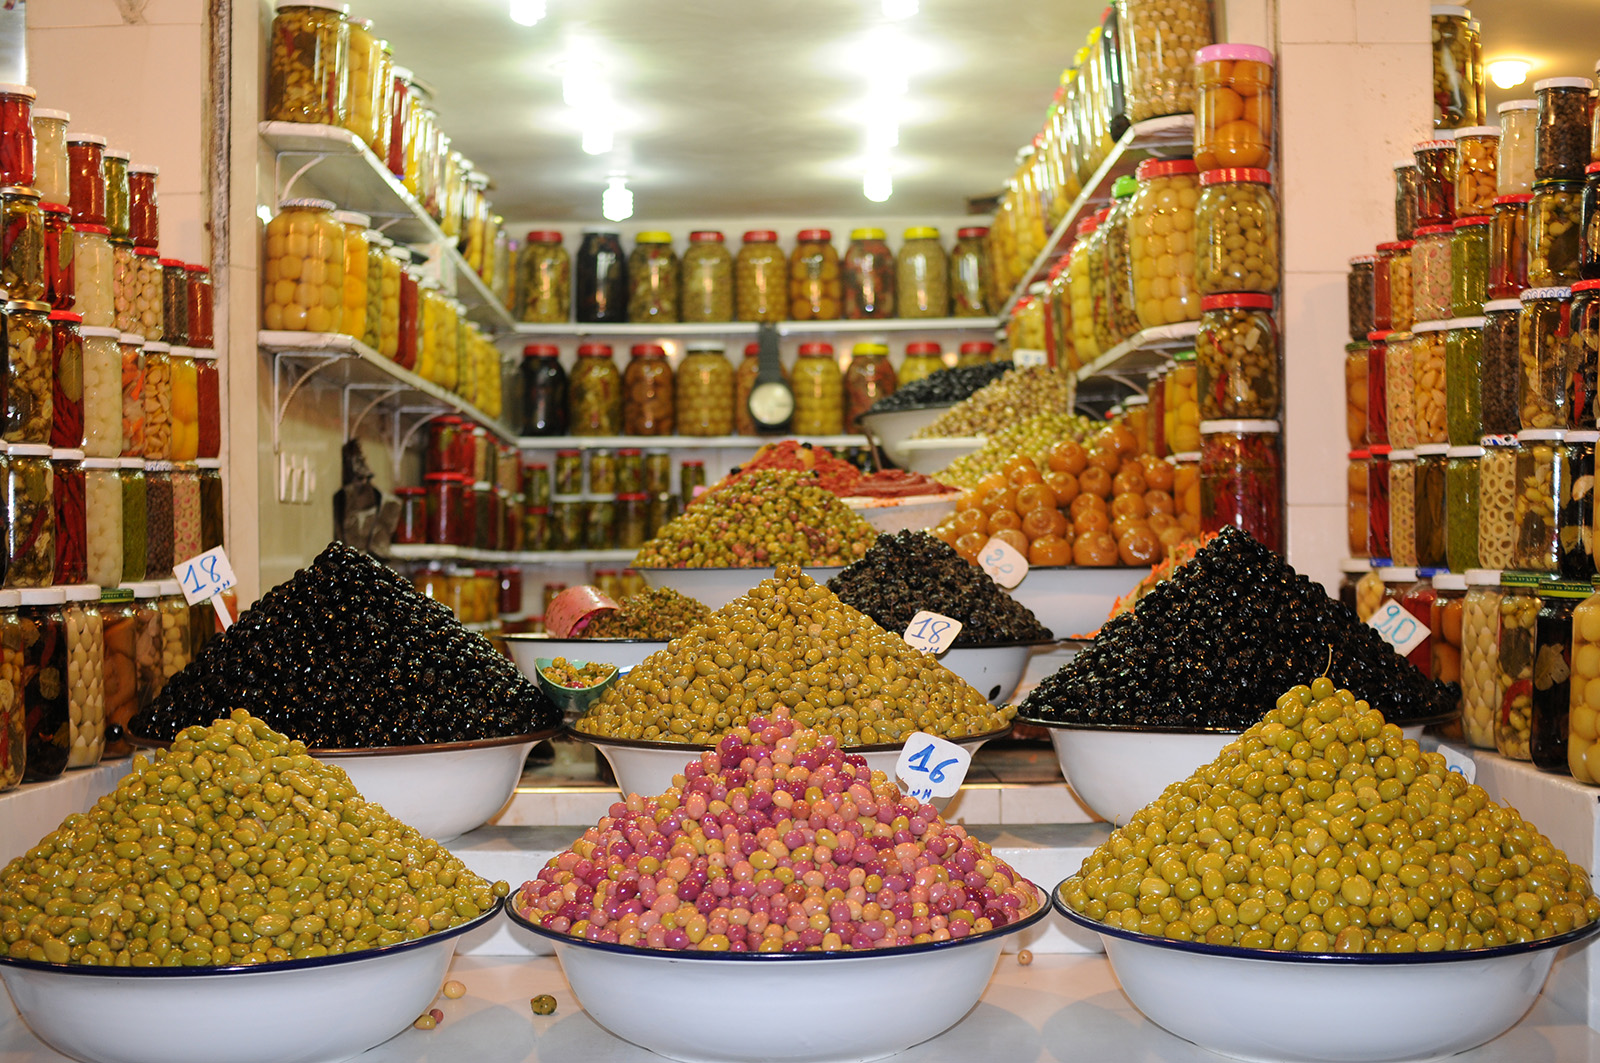 OWU Theory into Practice: Research on Olives & Sustainability in Morocco